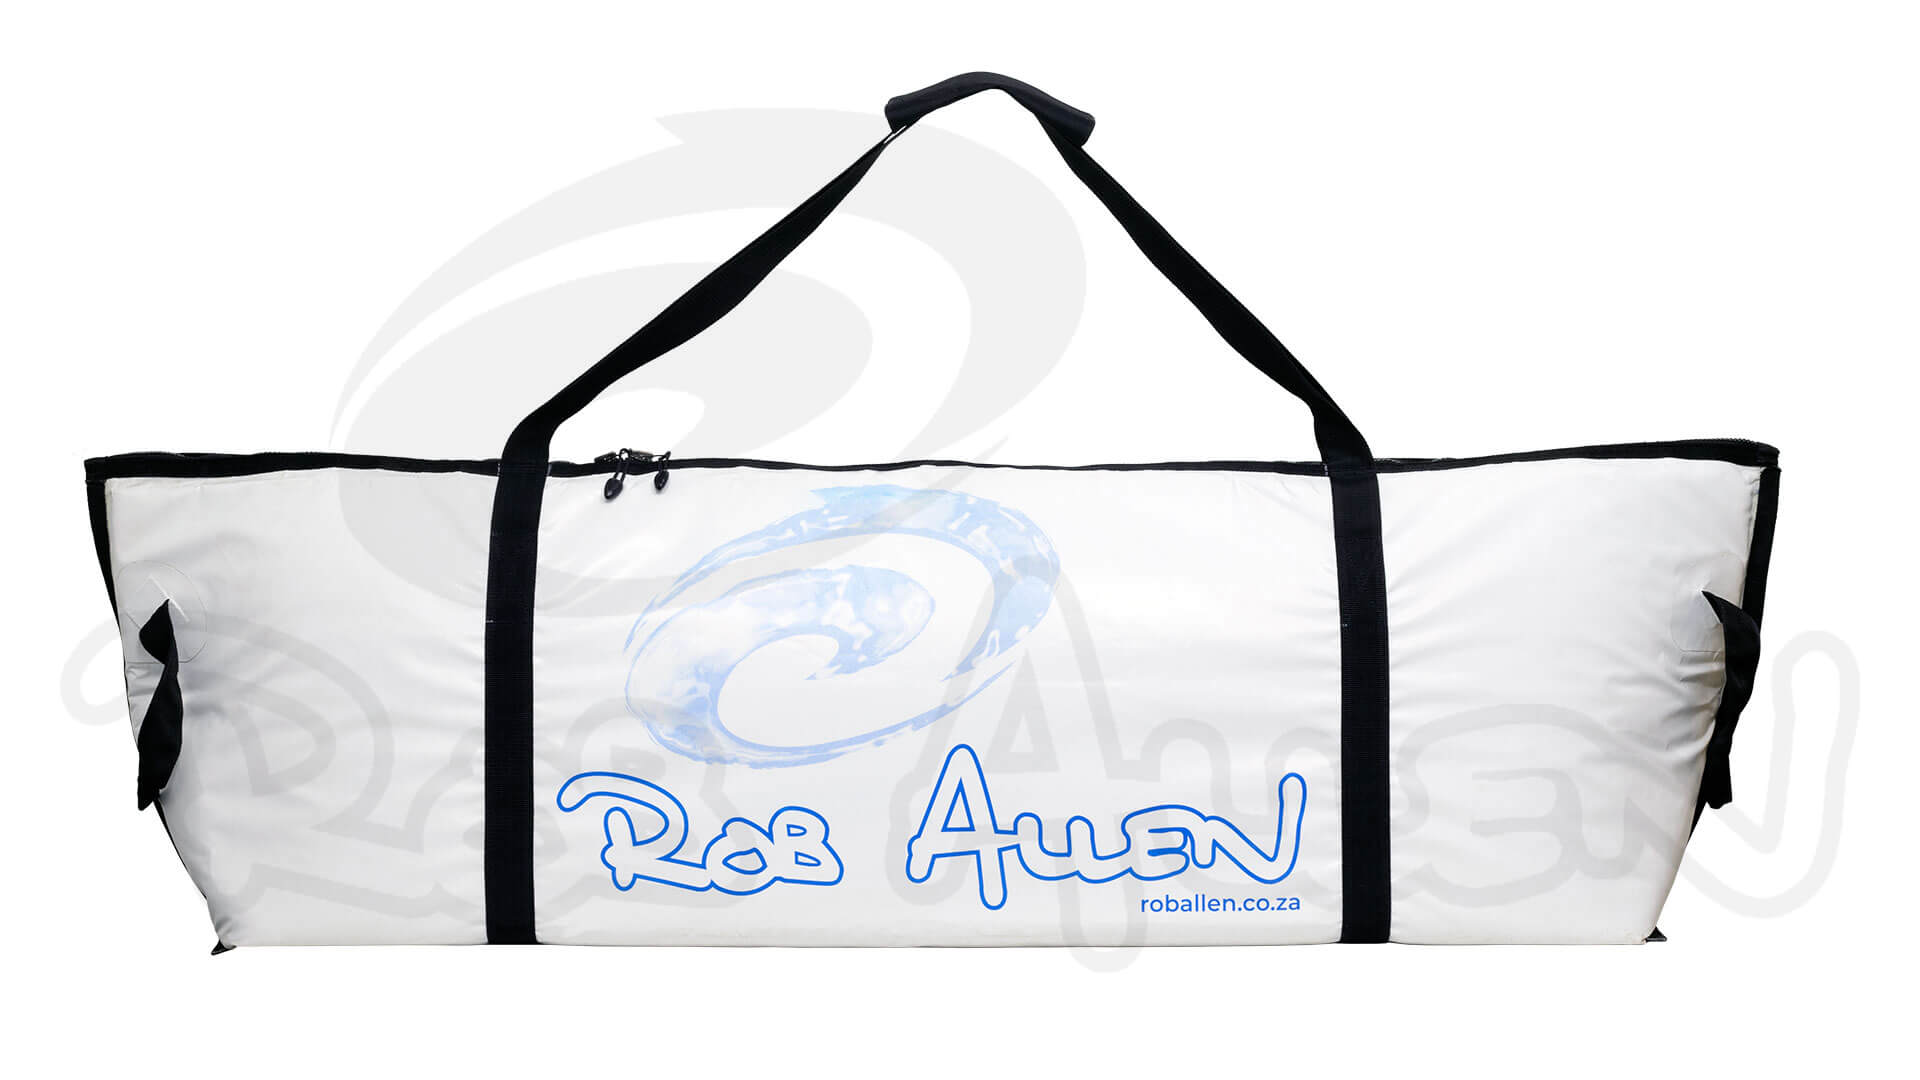 https://www.spearfishing.co.uk/wp-content/uploads/2021/11/rob-allen-insulated-fish-bag-1.jpg